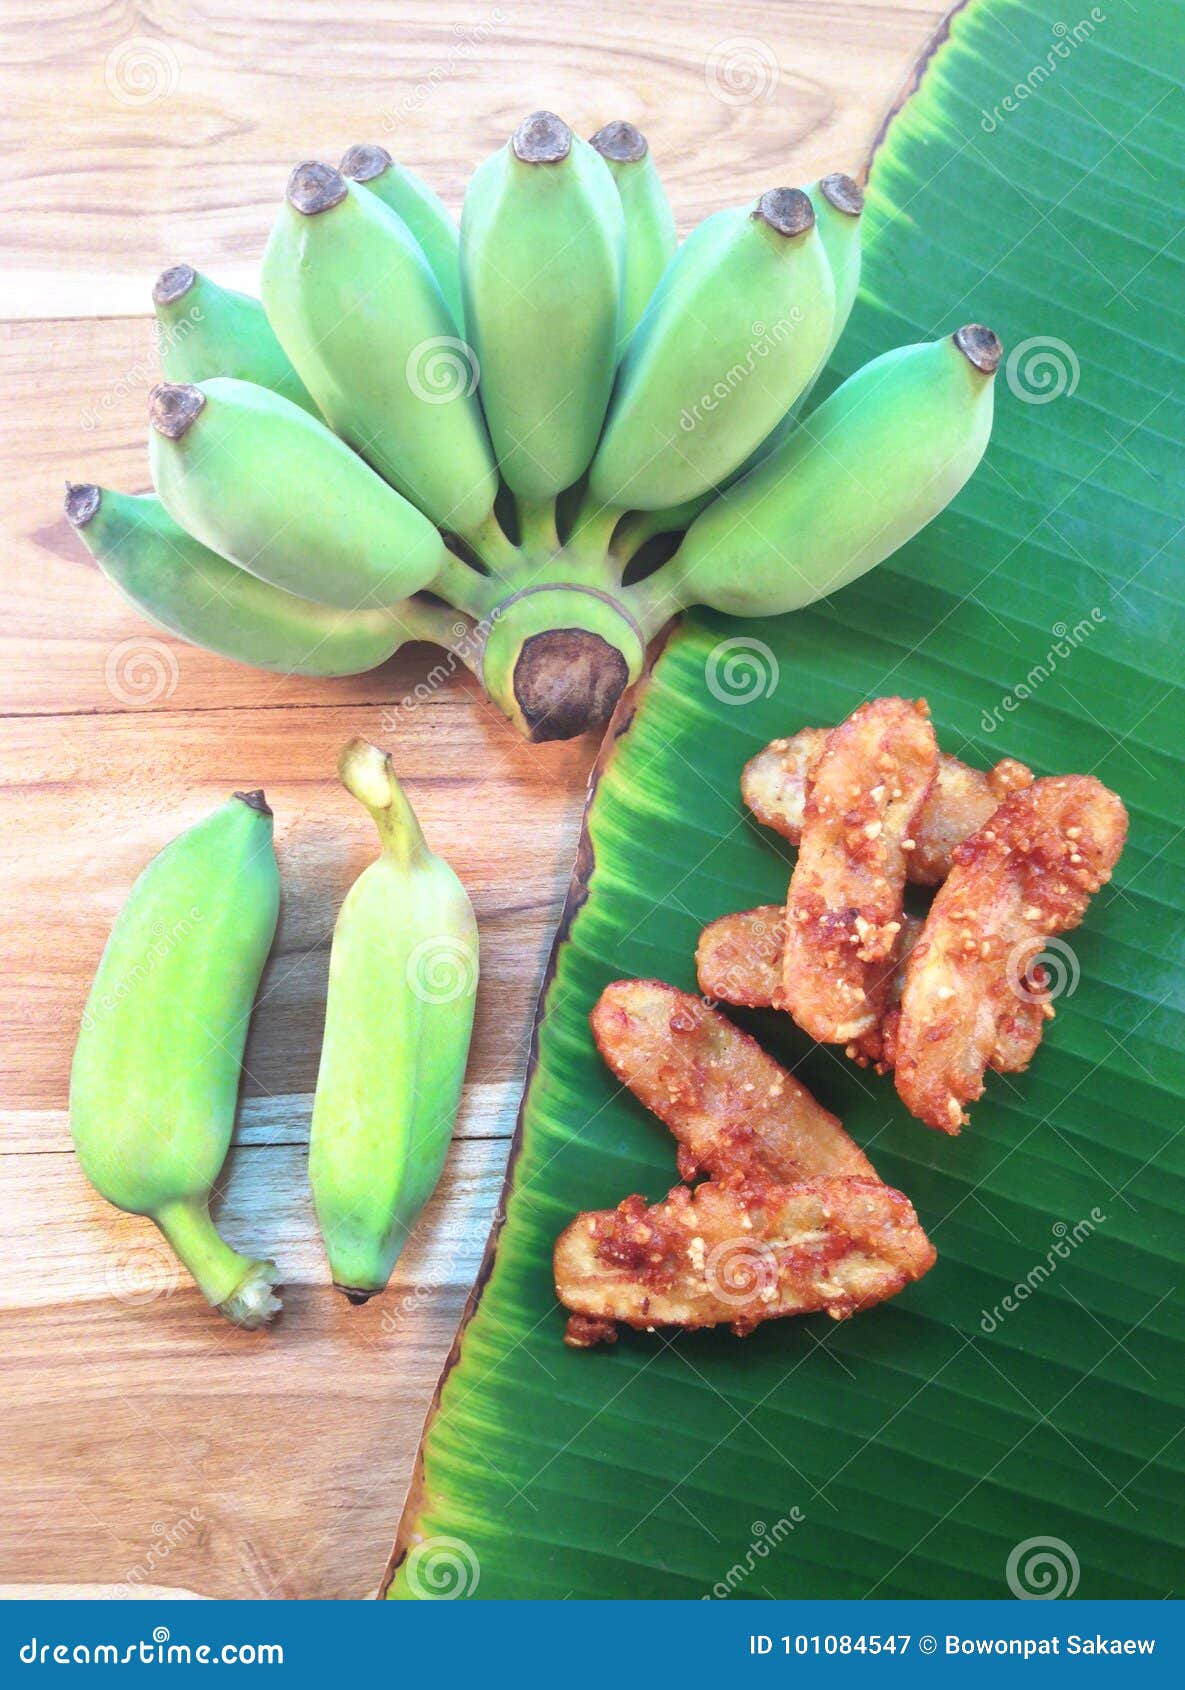 Green Cultivated Banana And Fried Banana On Wooden And Banana Le Stock ...